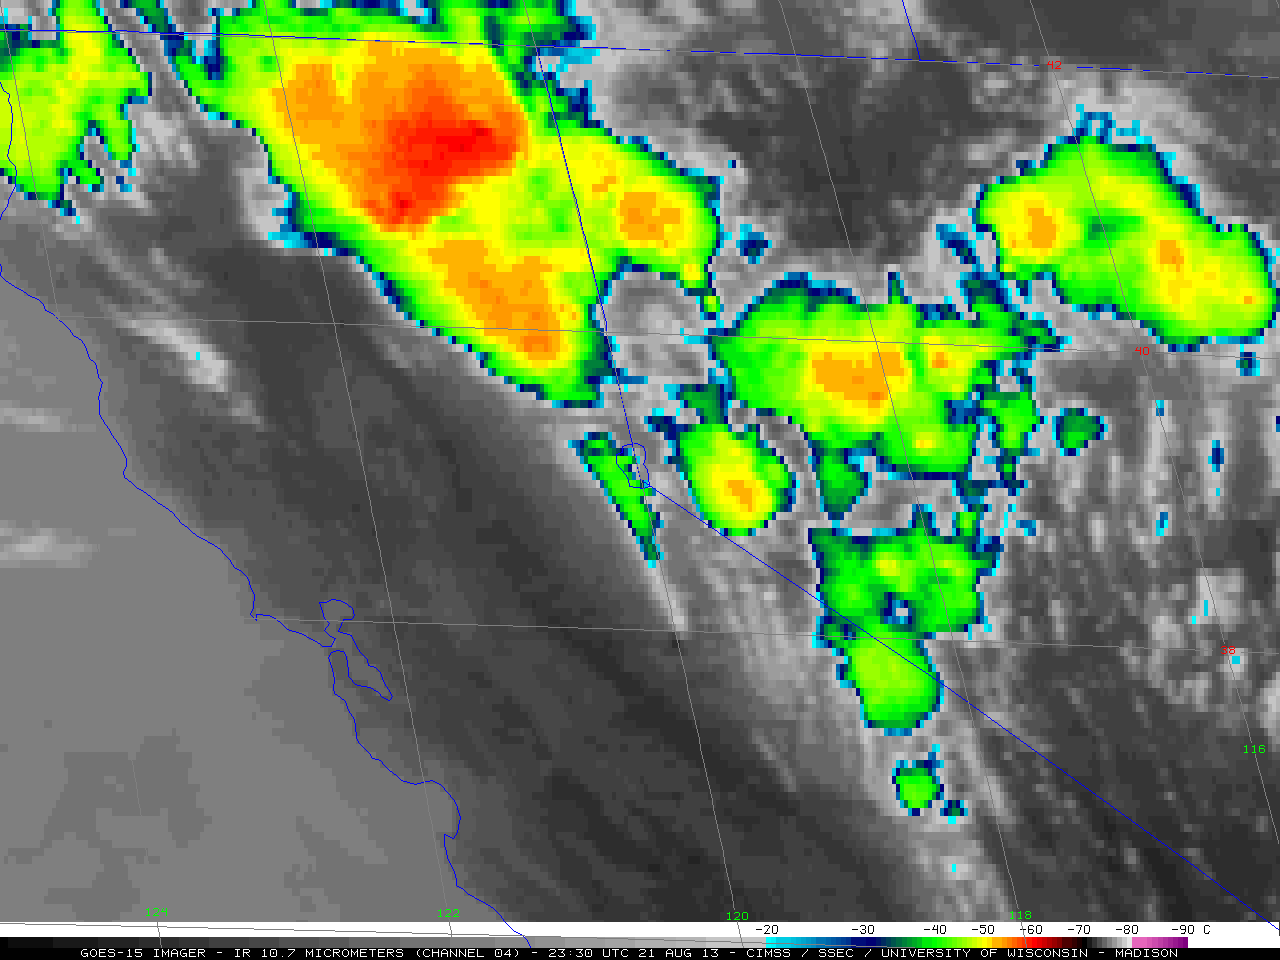 GOES-15 longwave infrared imagery (click image to play animation)